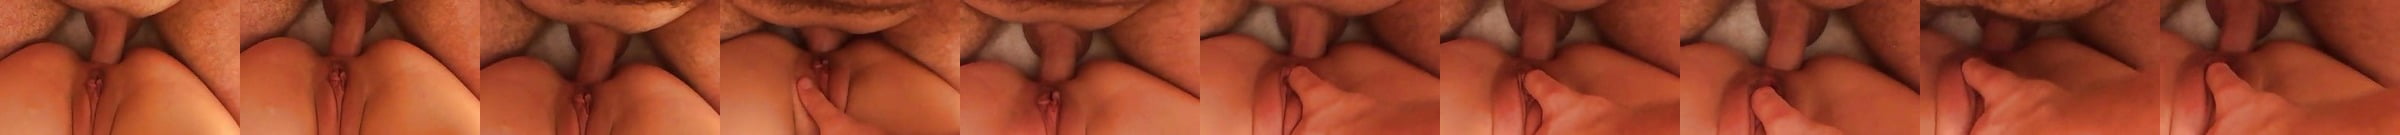 Featured Slow Anal Penetration Close Up Porn Videos Xhamster